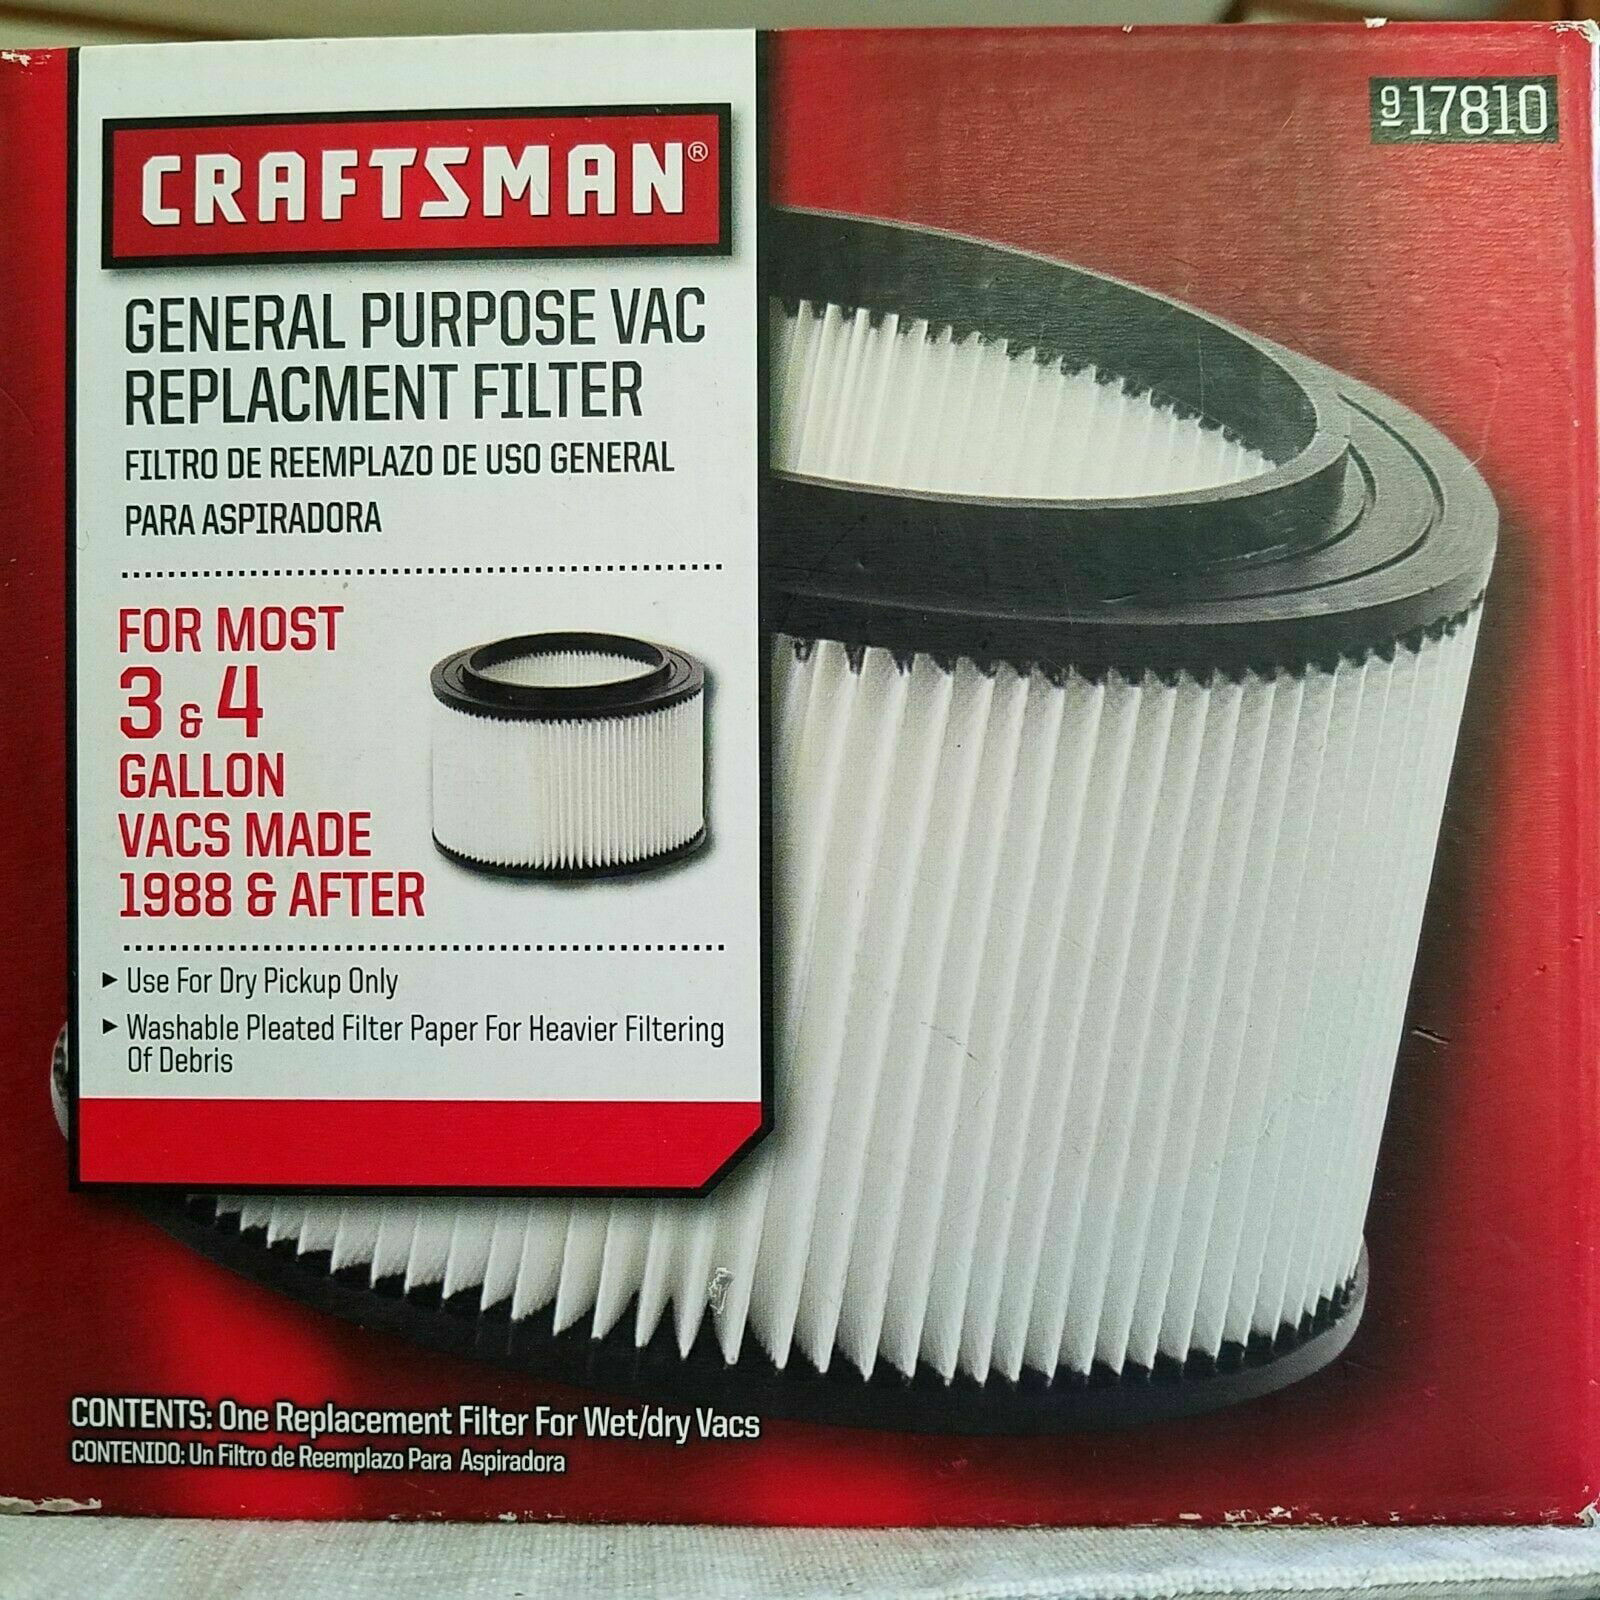 Wall Omaha Distributing Co Inc. Craftsman 9-38752 Wet/Dry Vacuum Replacement Filter